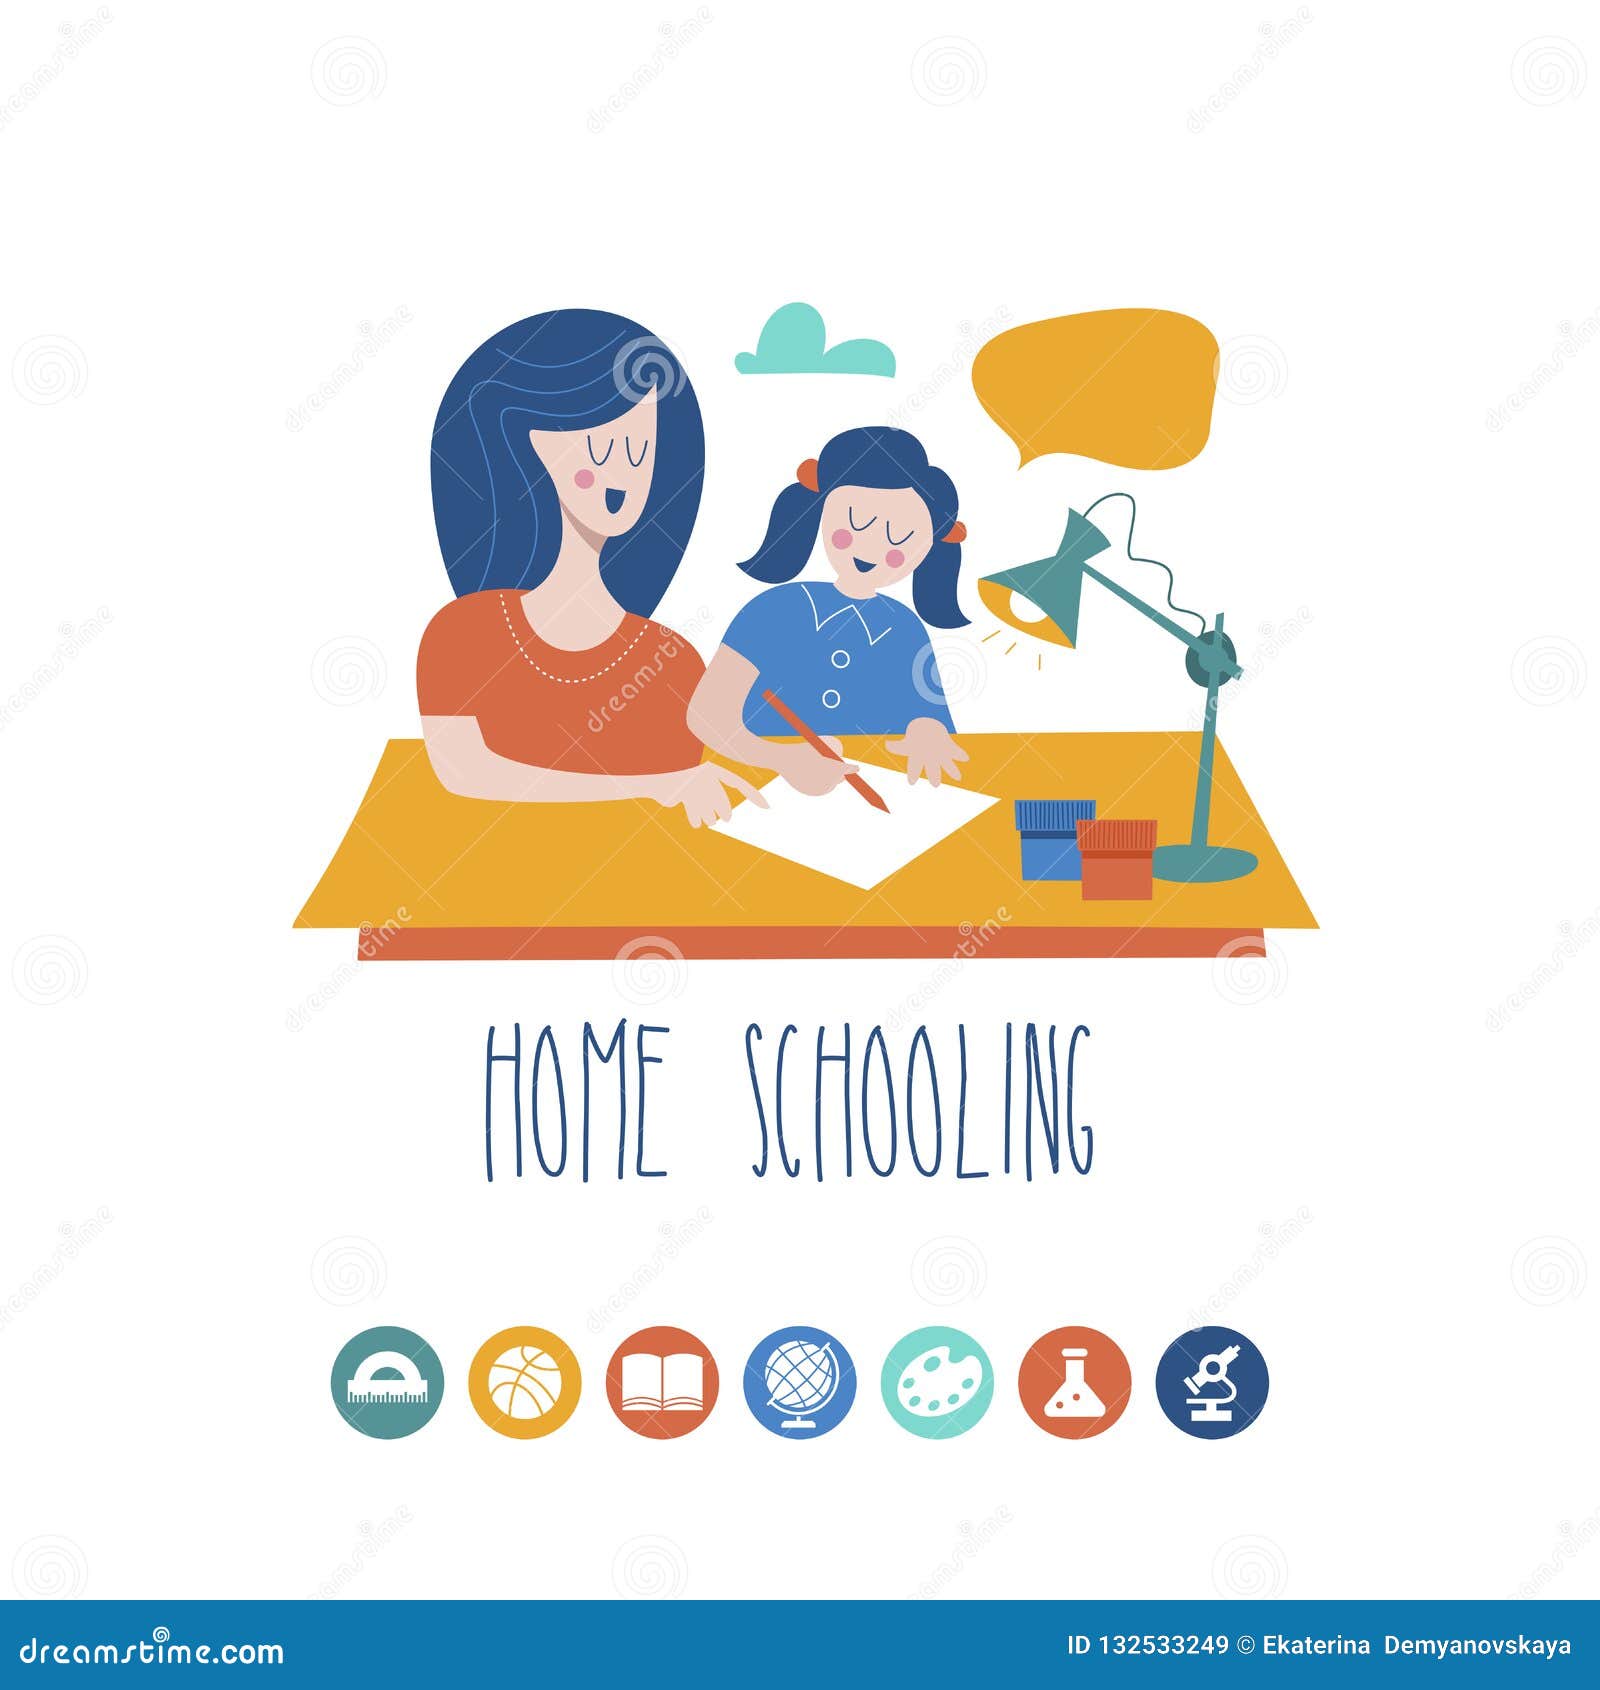 home schooling. the concept of getting a good education at home.   in flat style.